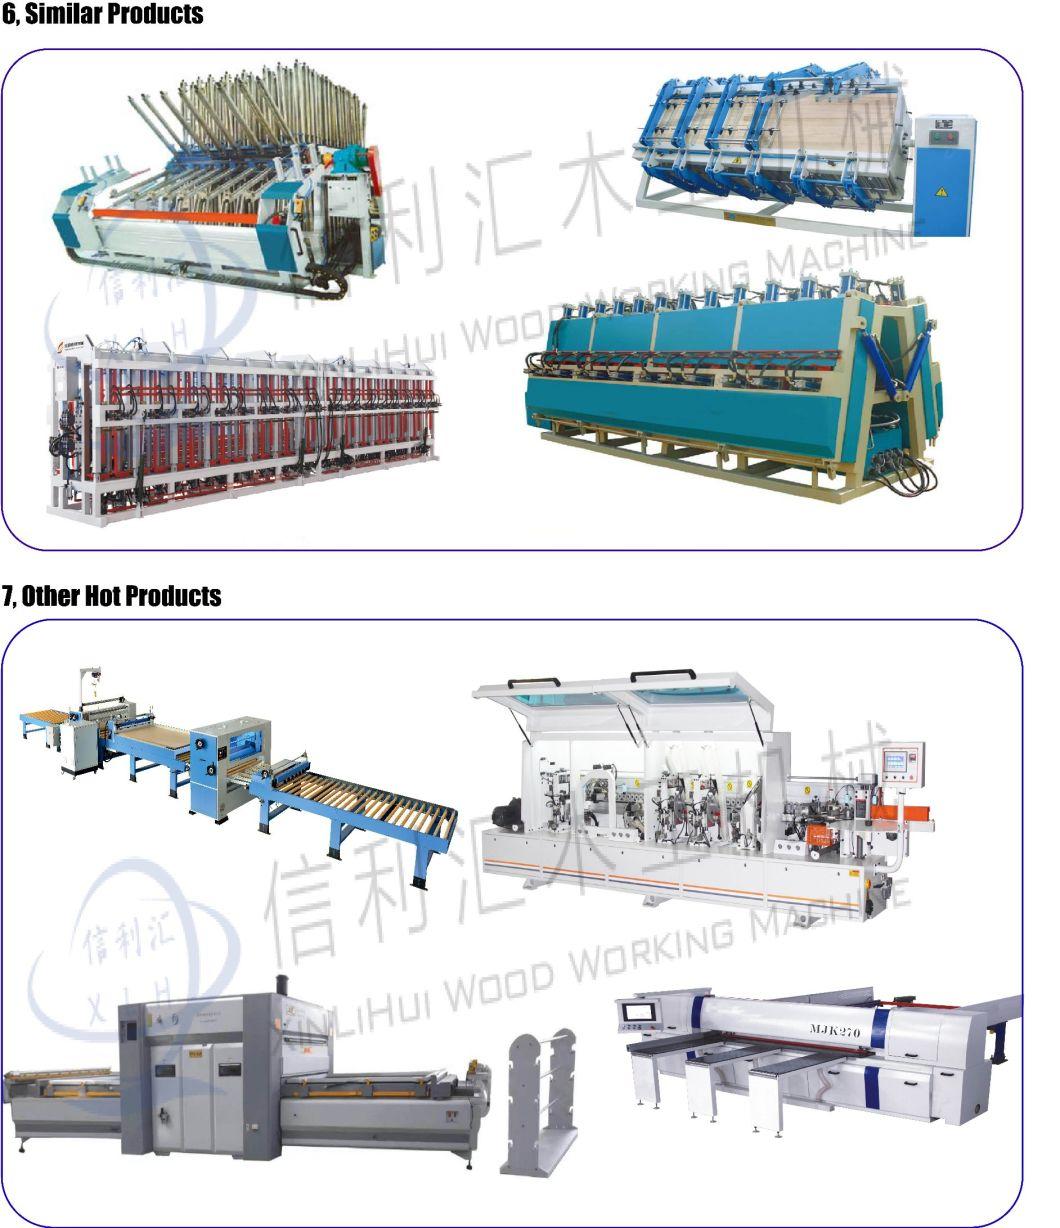 Continuous Edge Gluer for Grant Wood Block, Manual Puzzle Machine, High-Frequency Wooden Plate Plying Machines